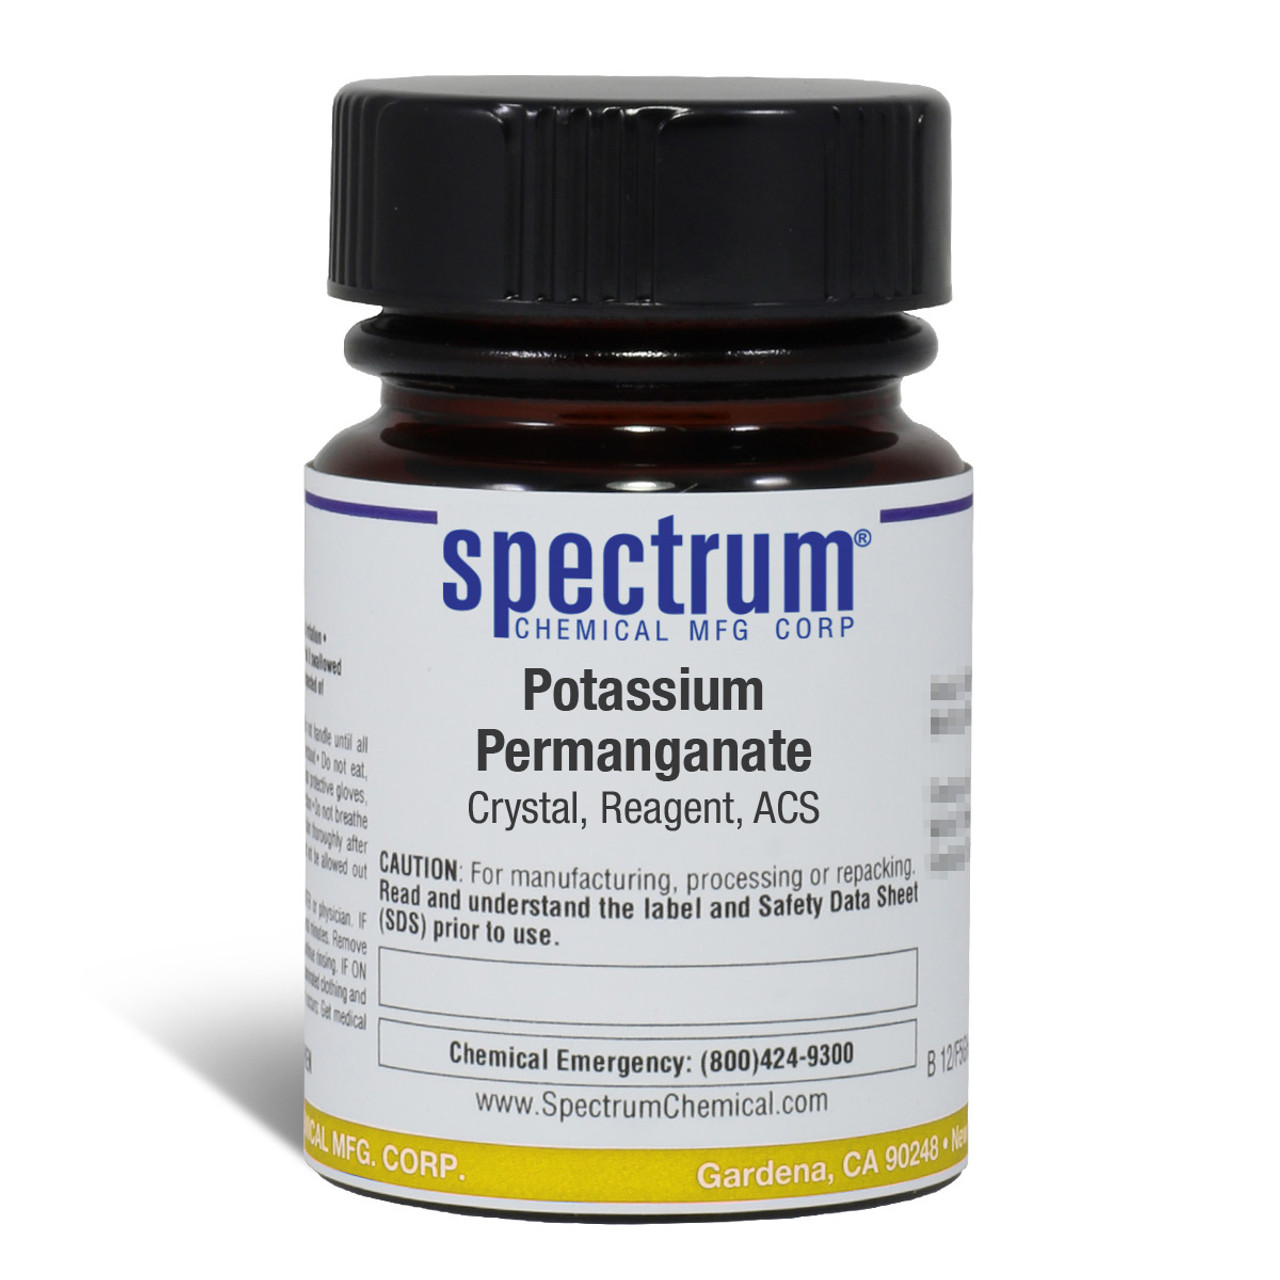 Potasium Permanganate - Cleaners Monthly